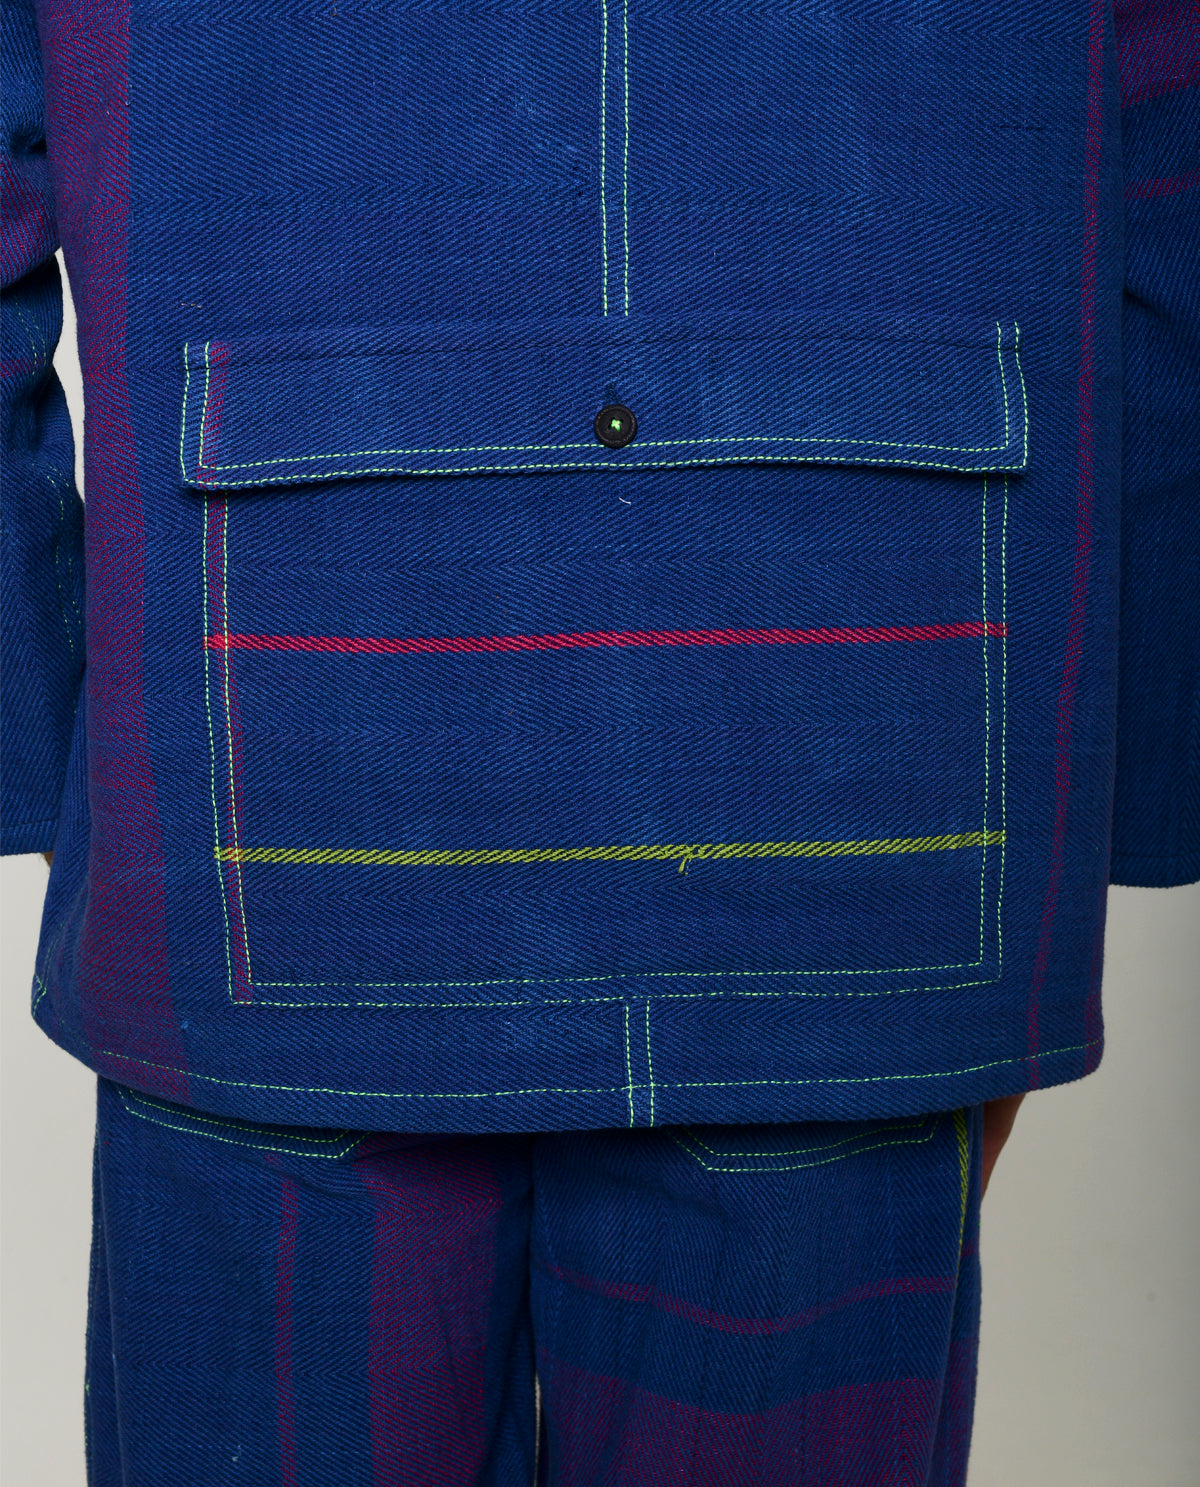 Handwoven Blue Multi Colored Cotton Shirt Jacket by Rias Jaipur with 100% Cotton, Blue, Casual wear, Multicolor, Natural, Overlays, RE 2.O, RE 2.O by Rias Jaipur, Relaxed, Stripes, Unisex, Womenswear at Kamakhyaa for sustainable fashion